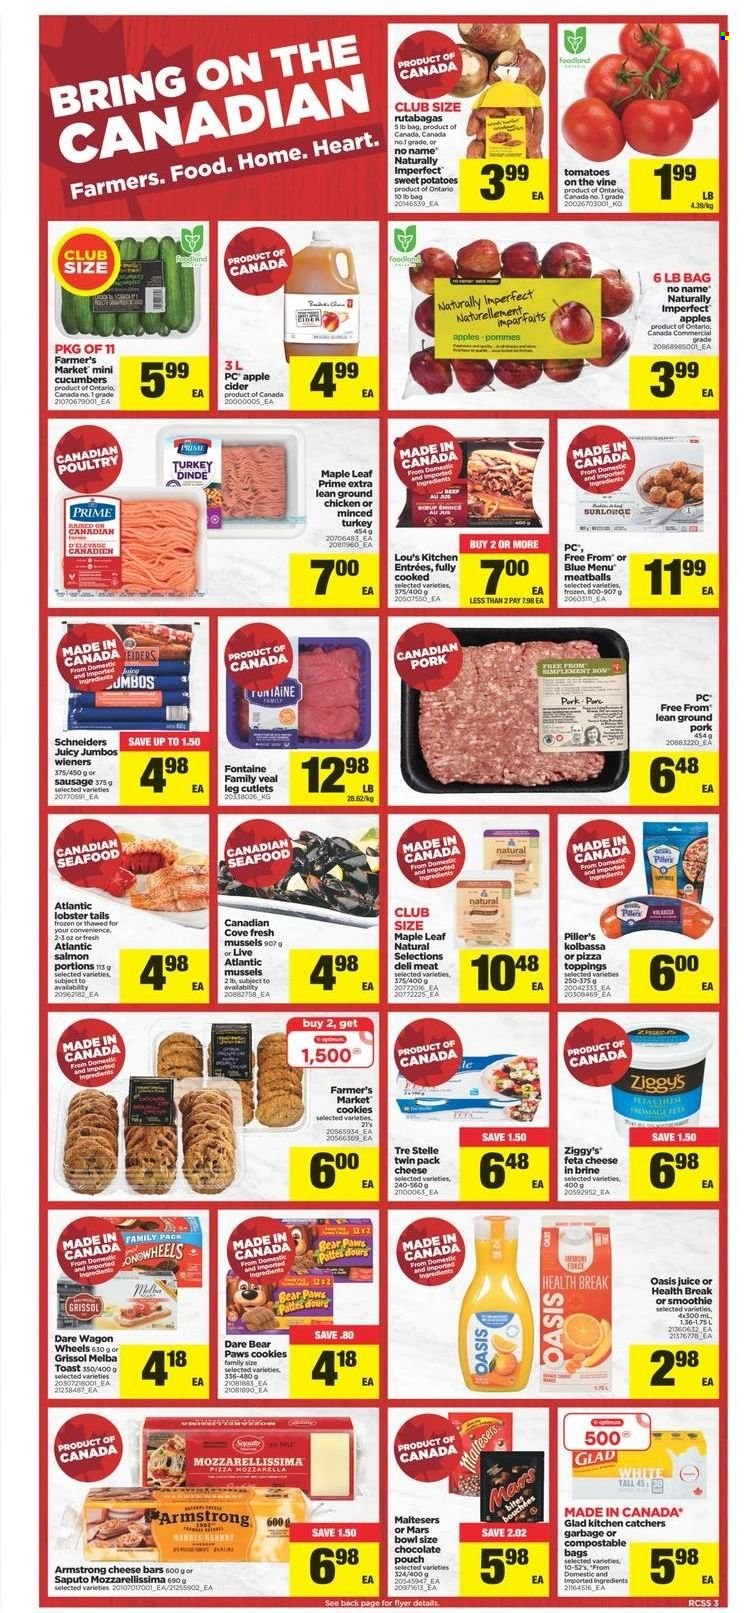 thumbnail - Real Canadian Superstore Flyer - November 25, 2021 - December 01, 2021 - Sales products - sweet potato, potatoes, lobster, mussels, salmon, lobster tail, No Name, pizza, meatballs, sausage, feta, cookies, chocolate, Mars, Maltesers, juice, smoothie, apple cider, cider, ground chicken, chicken, bowl, Paws, wagon. Page 3.